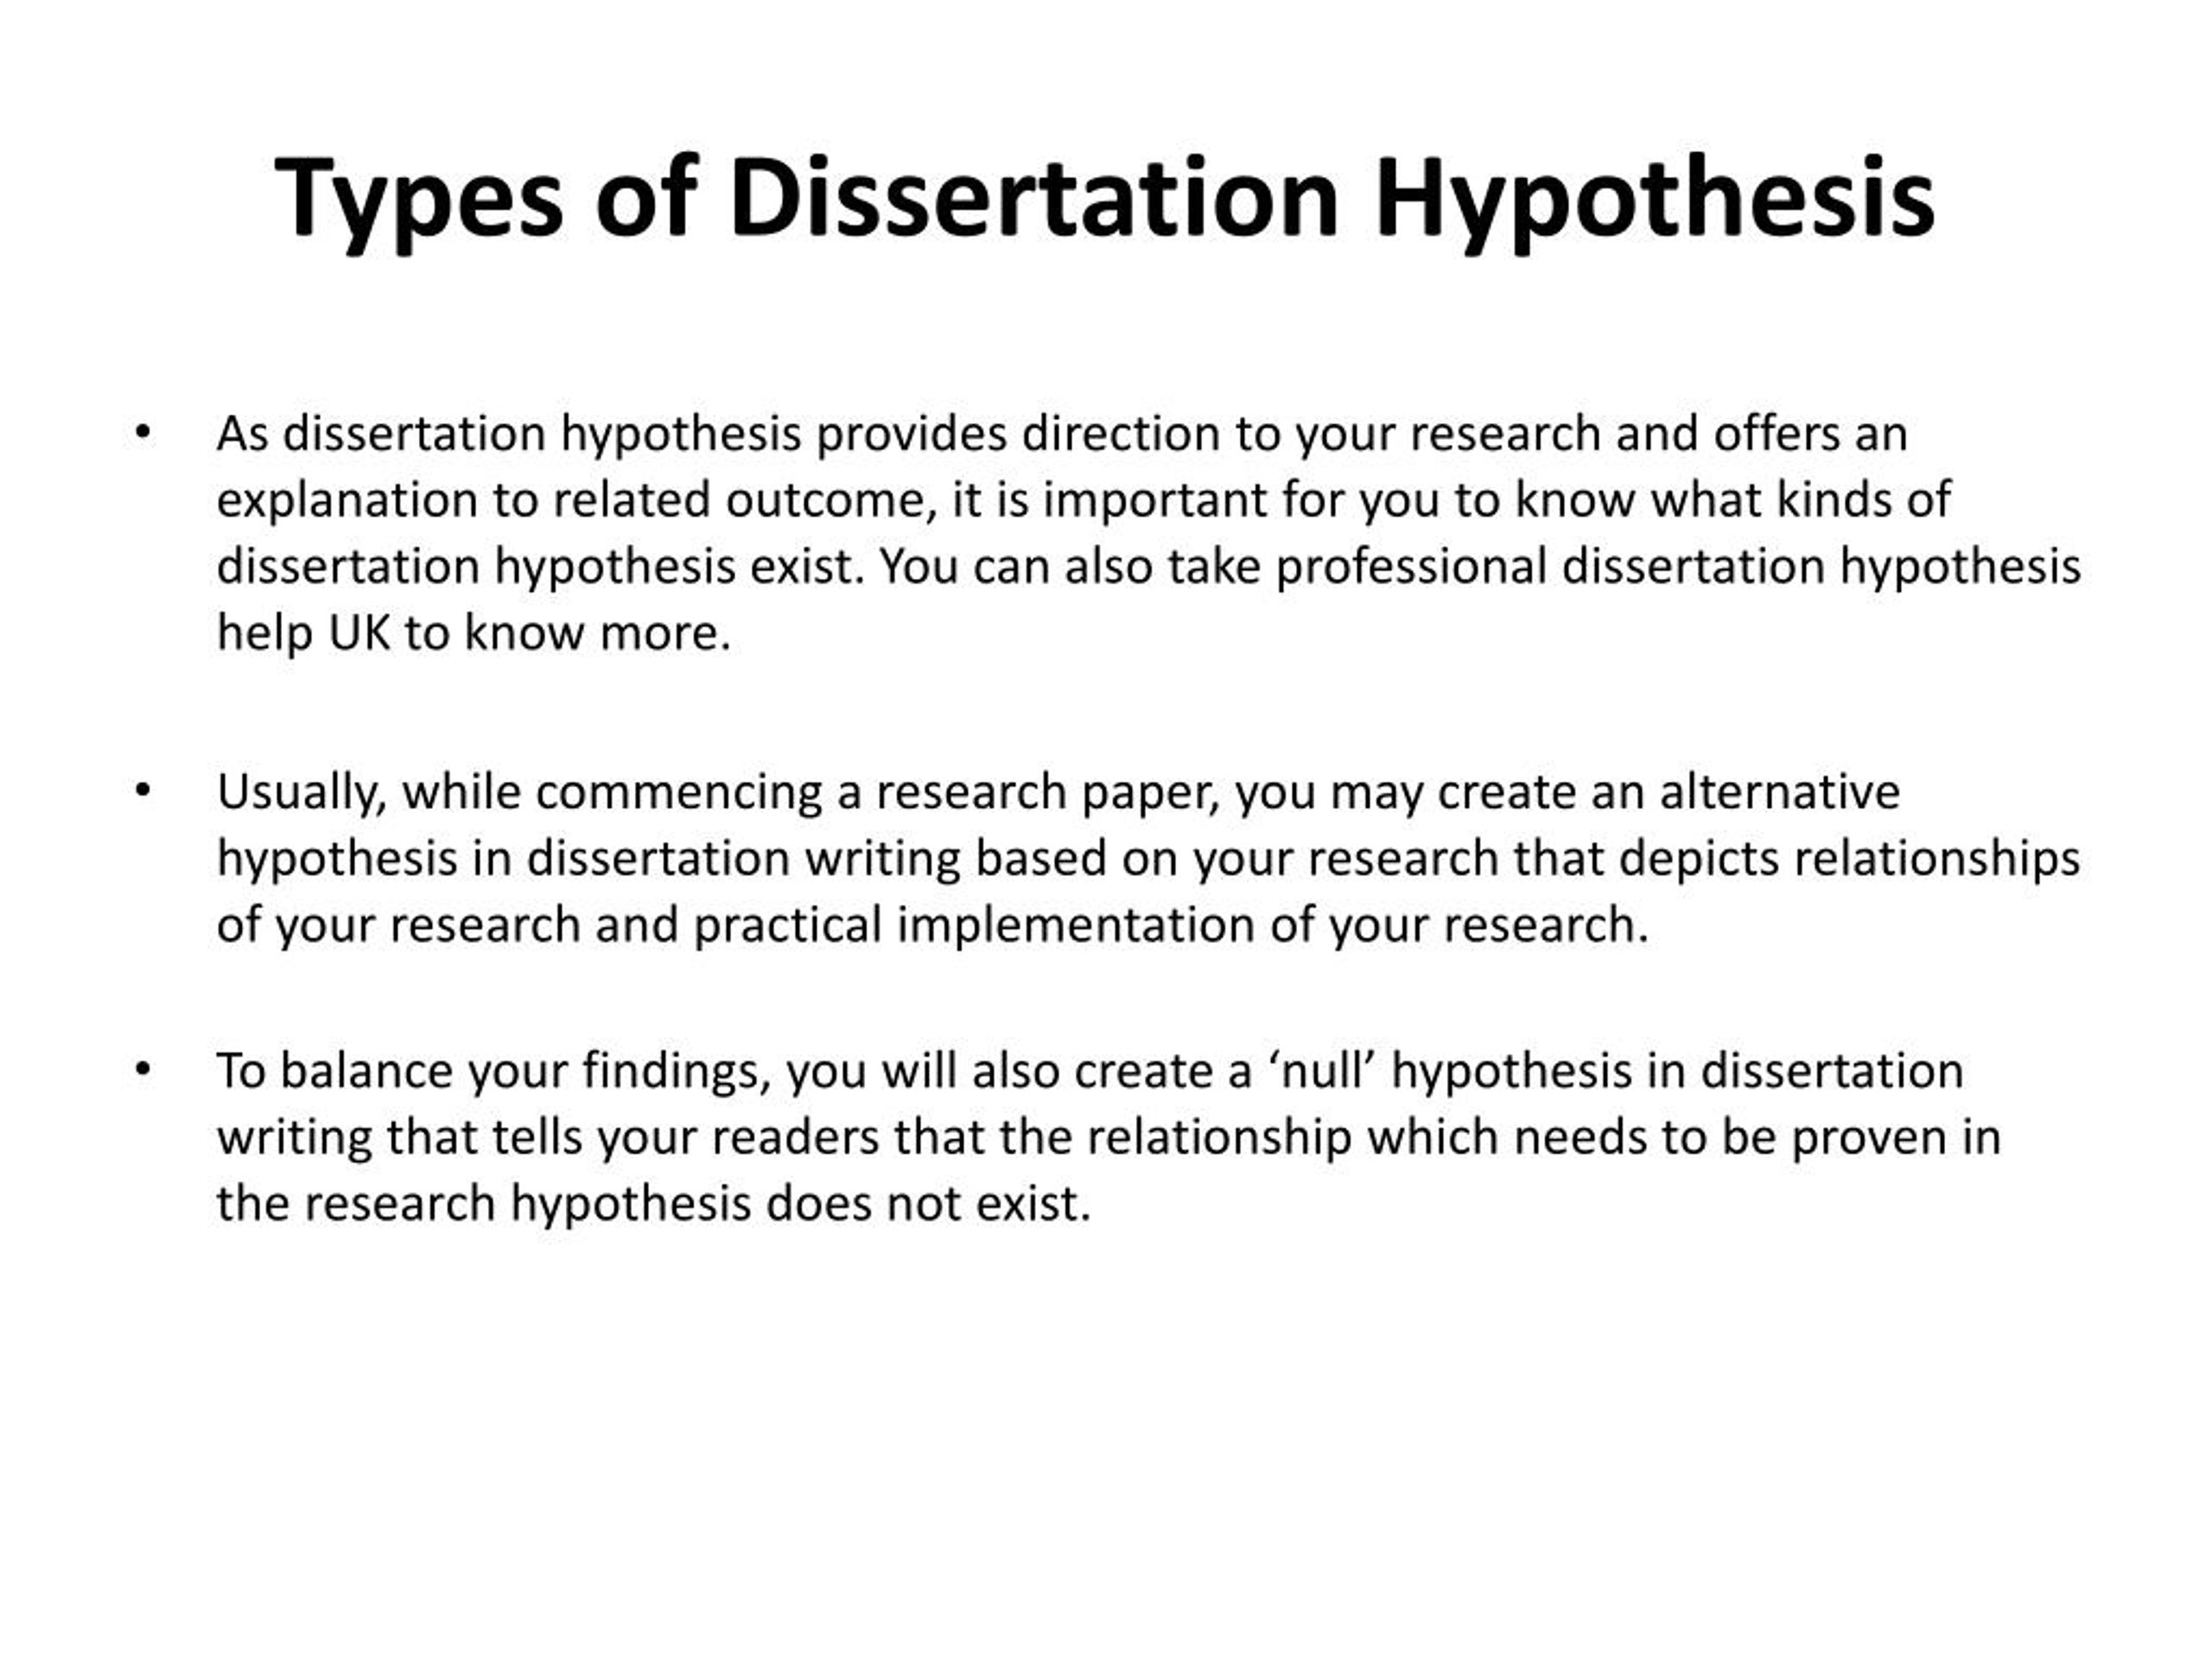 hypothesis in dissertation examples